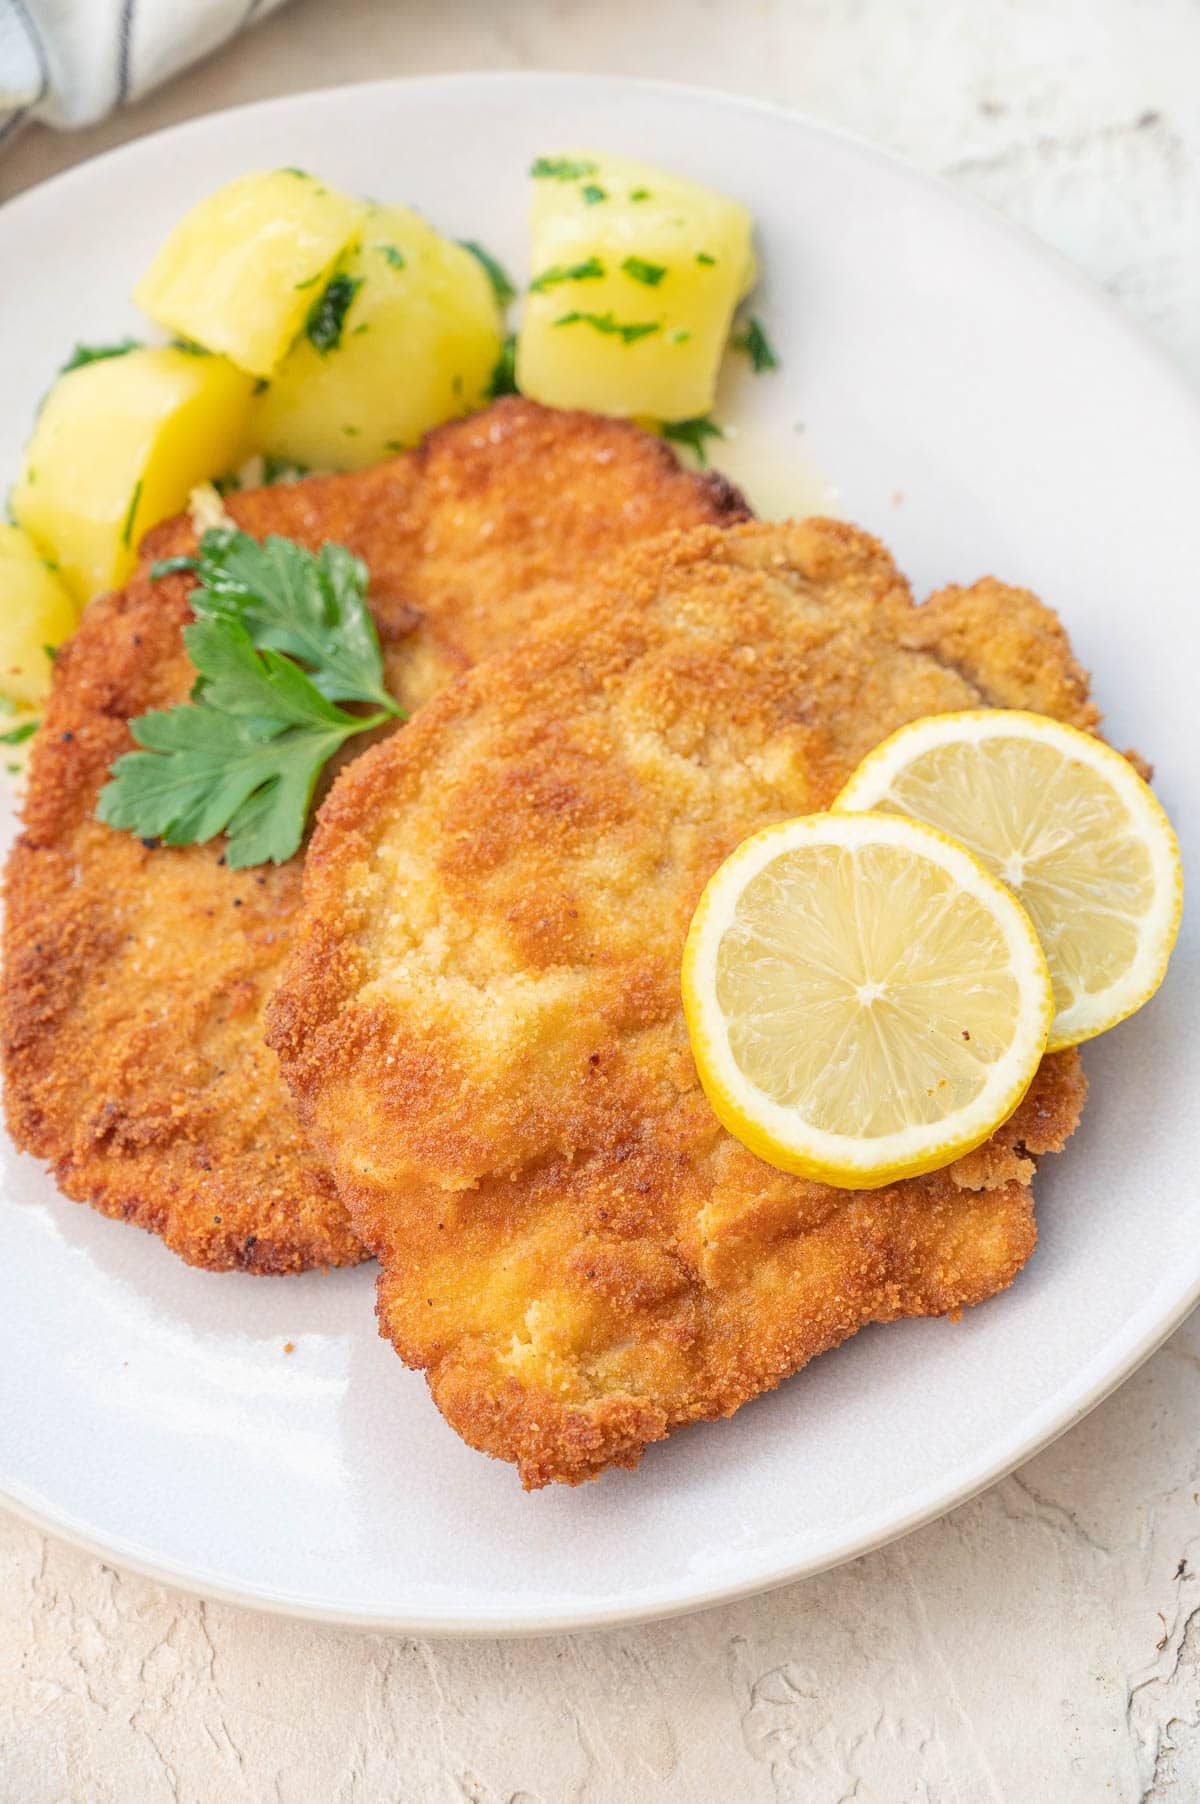 German pork schnitzel topped with lemon slices and served with potatoes on a beige plate.